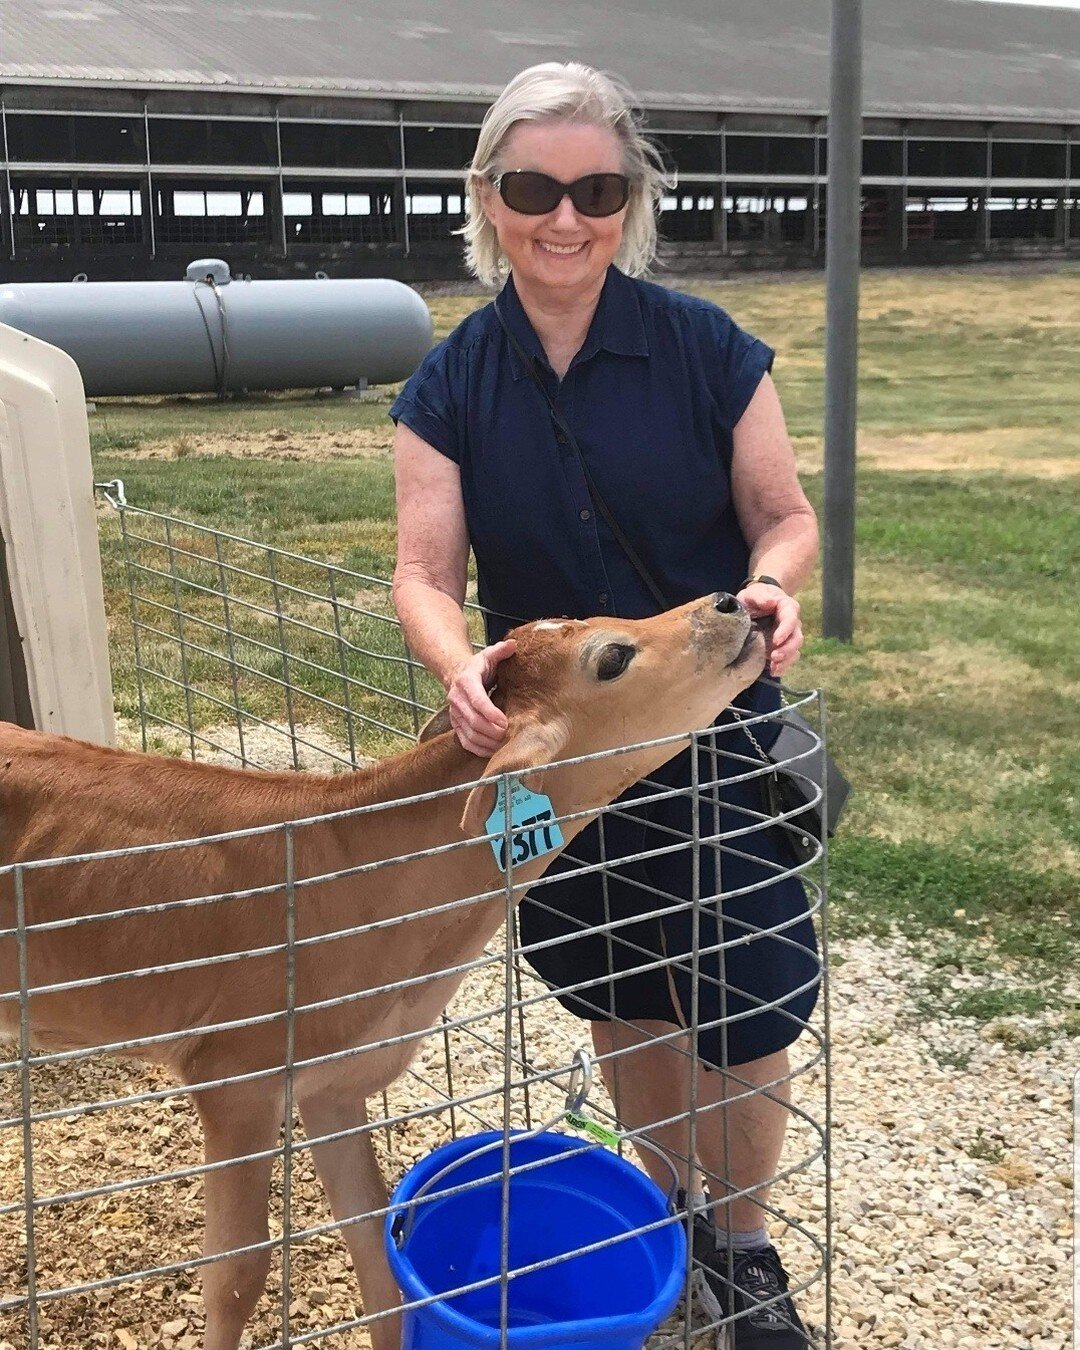 Deb was our Name the Calf winner.
Here she is with Fawn &amp; also got to pickup a party pack of 24 single serve froyo cups for being our winner!  They seem to get along well!